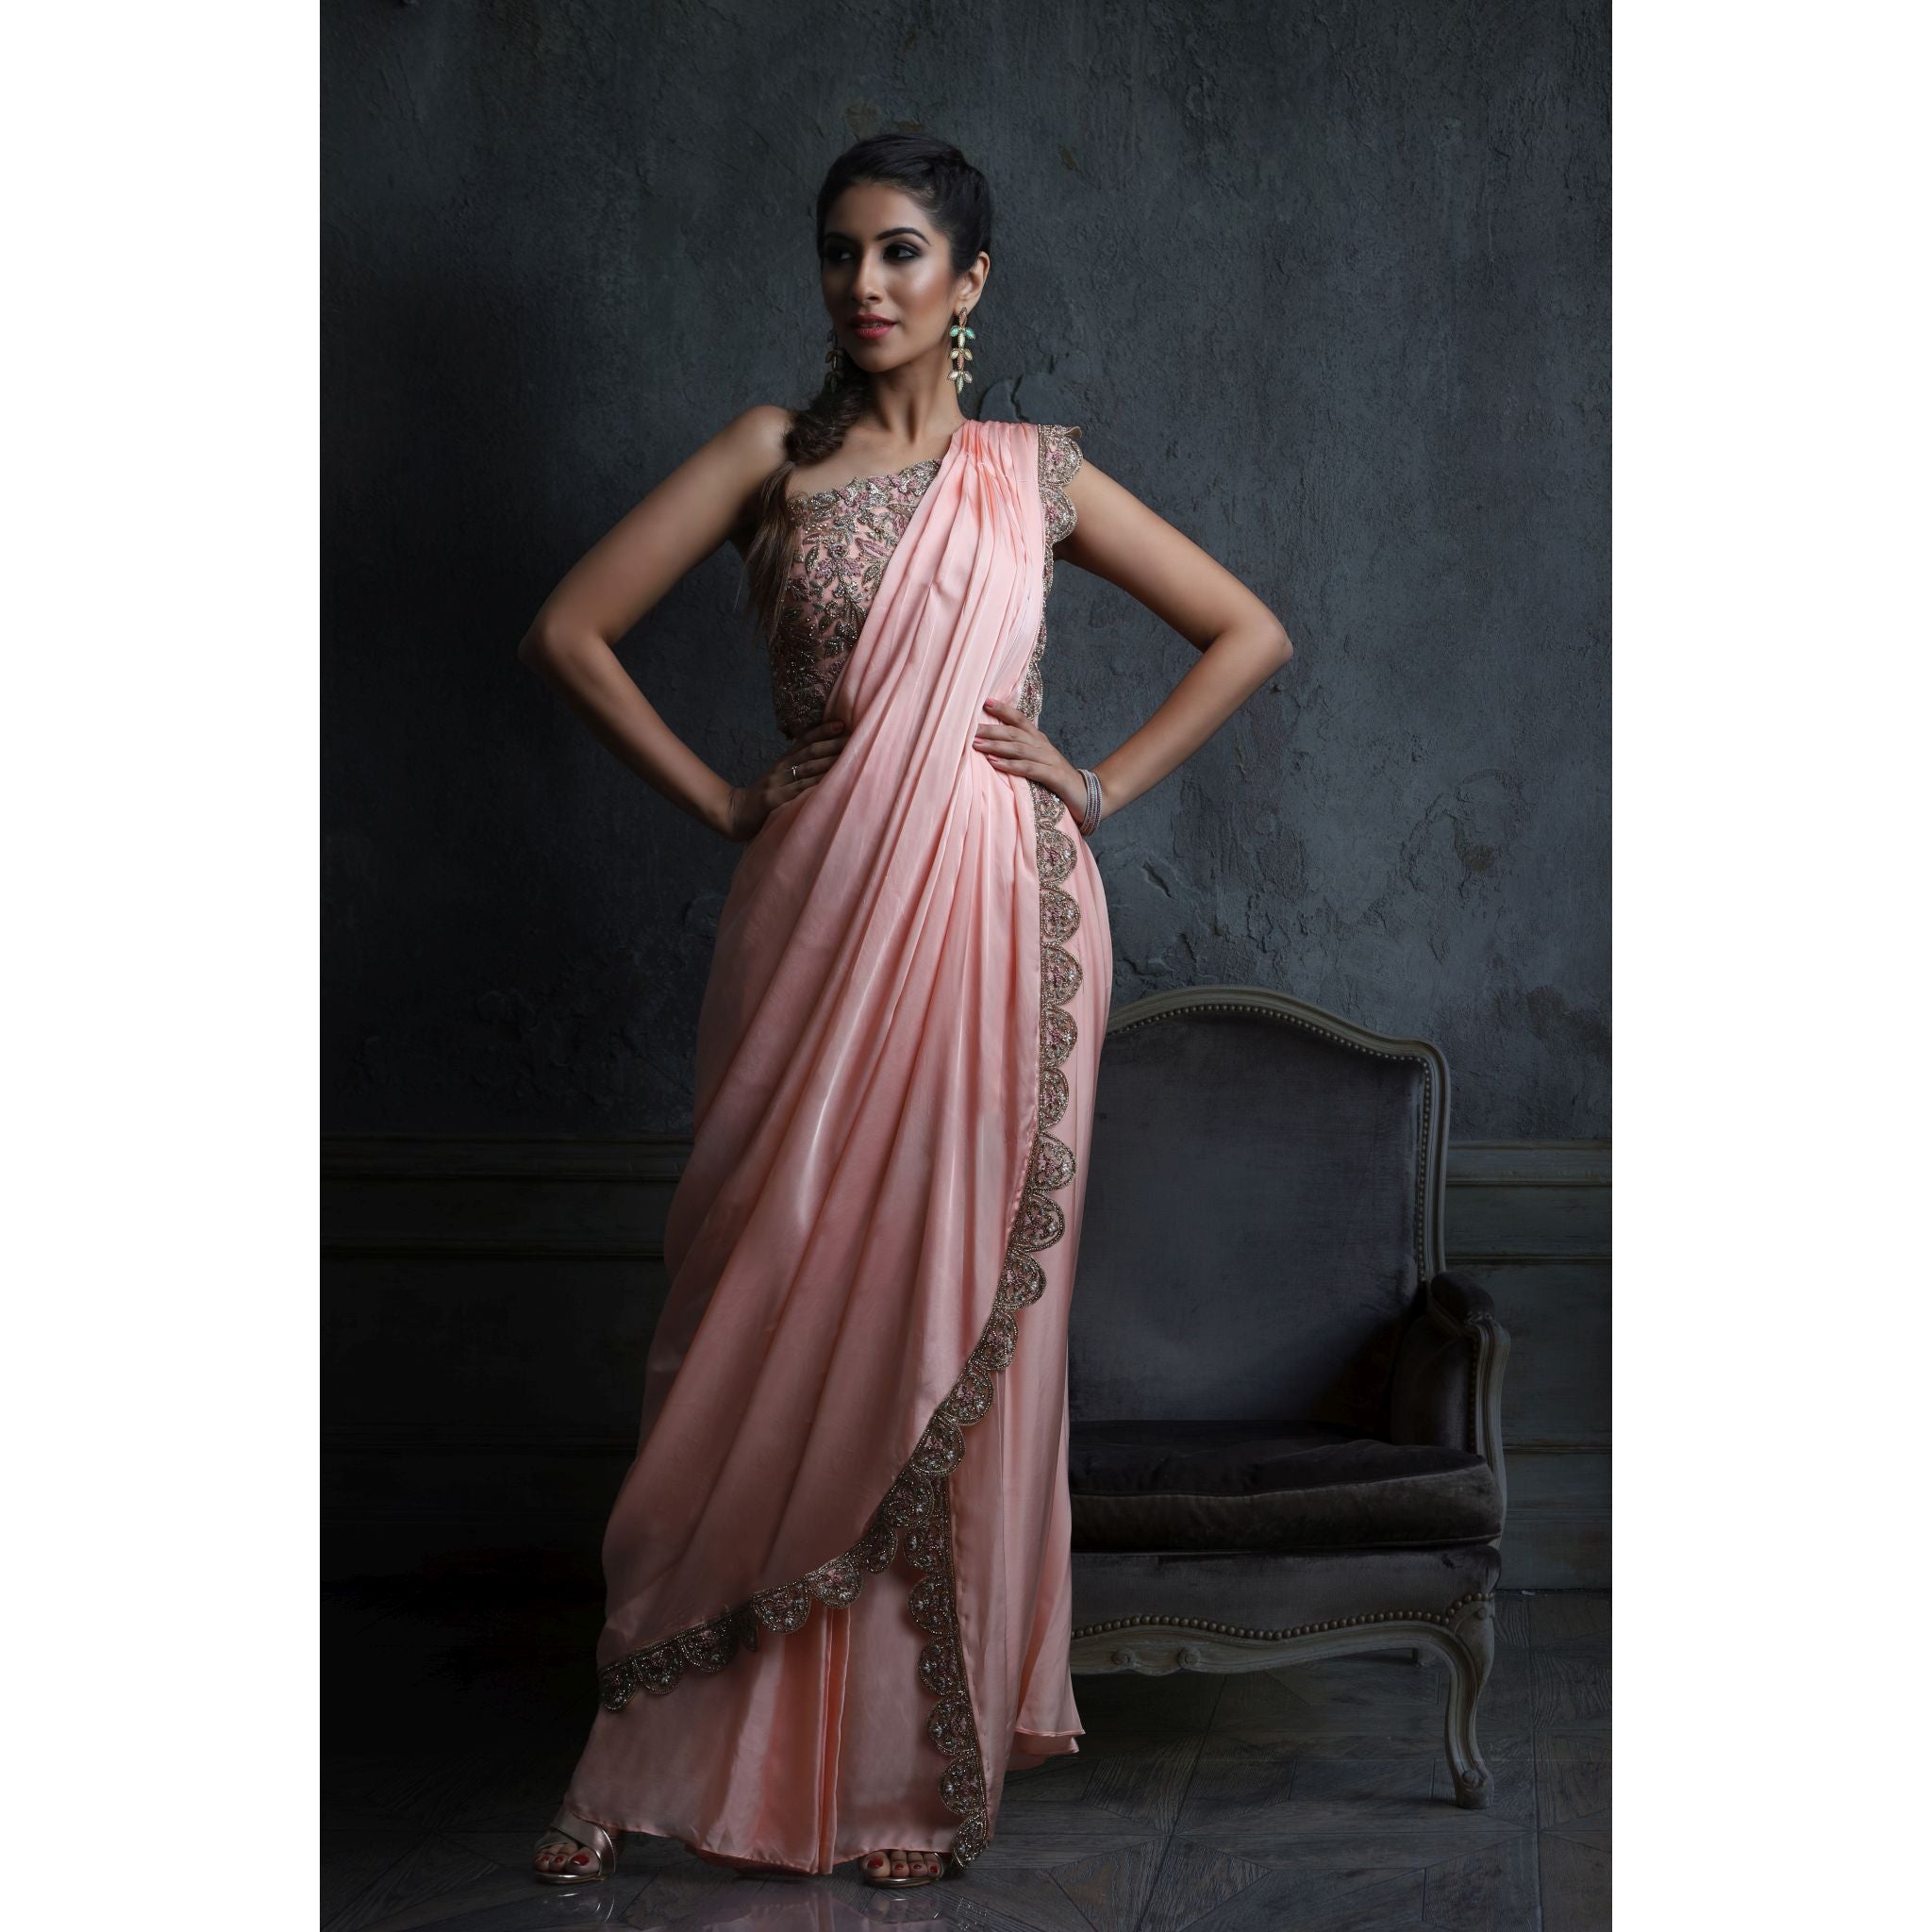 Pink Pre-Drapped Saree - Indian Designer Bridal Wedding Outfit